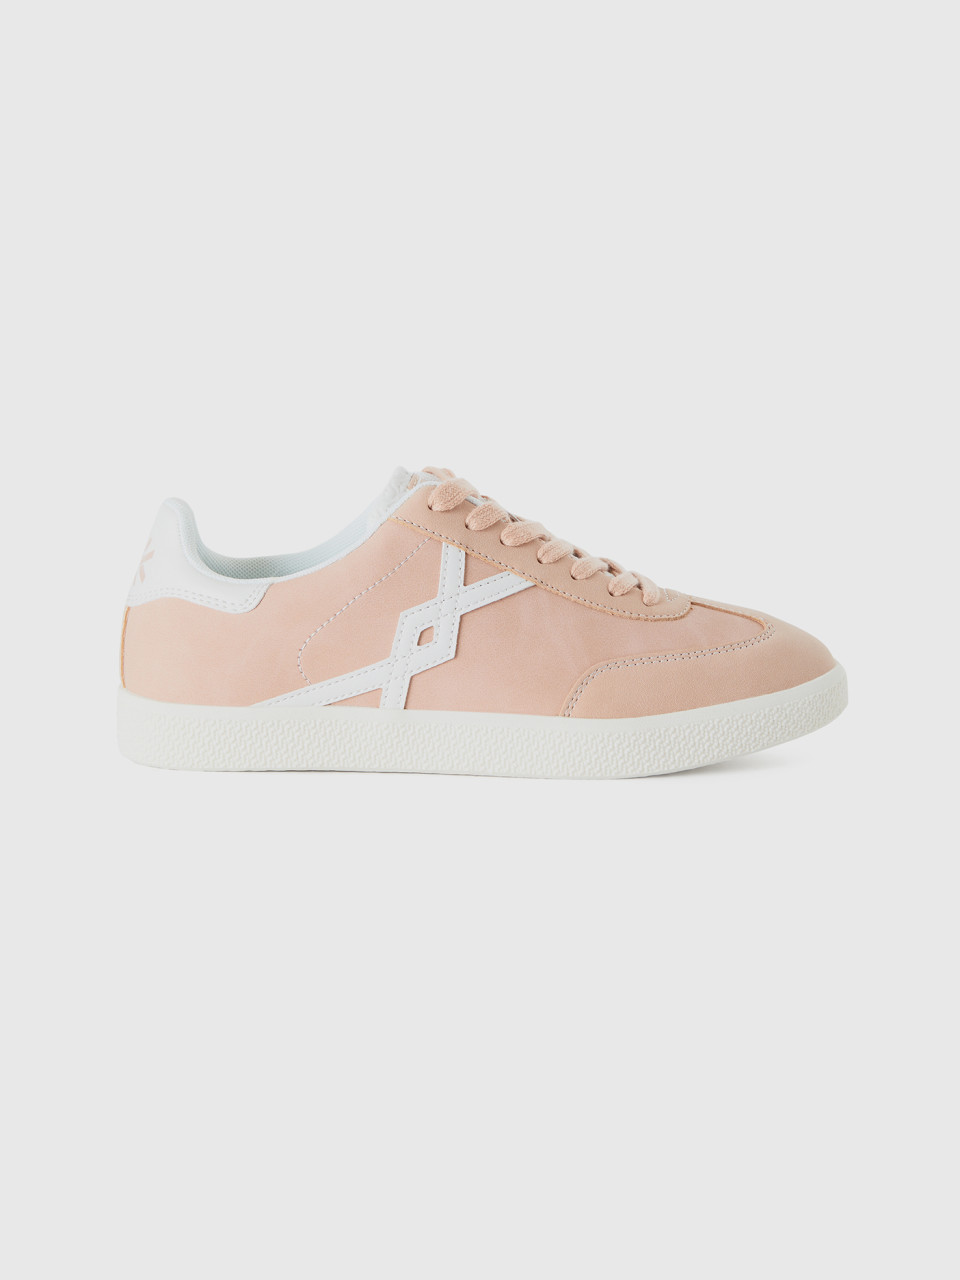 Benetton, Low-top Sneakers In Imitation Leather,5, Soft Pink